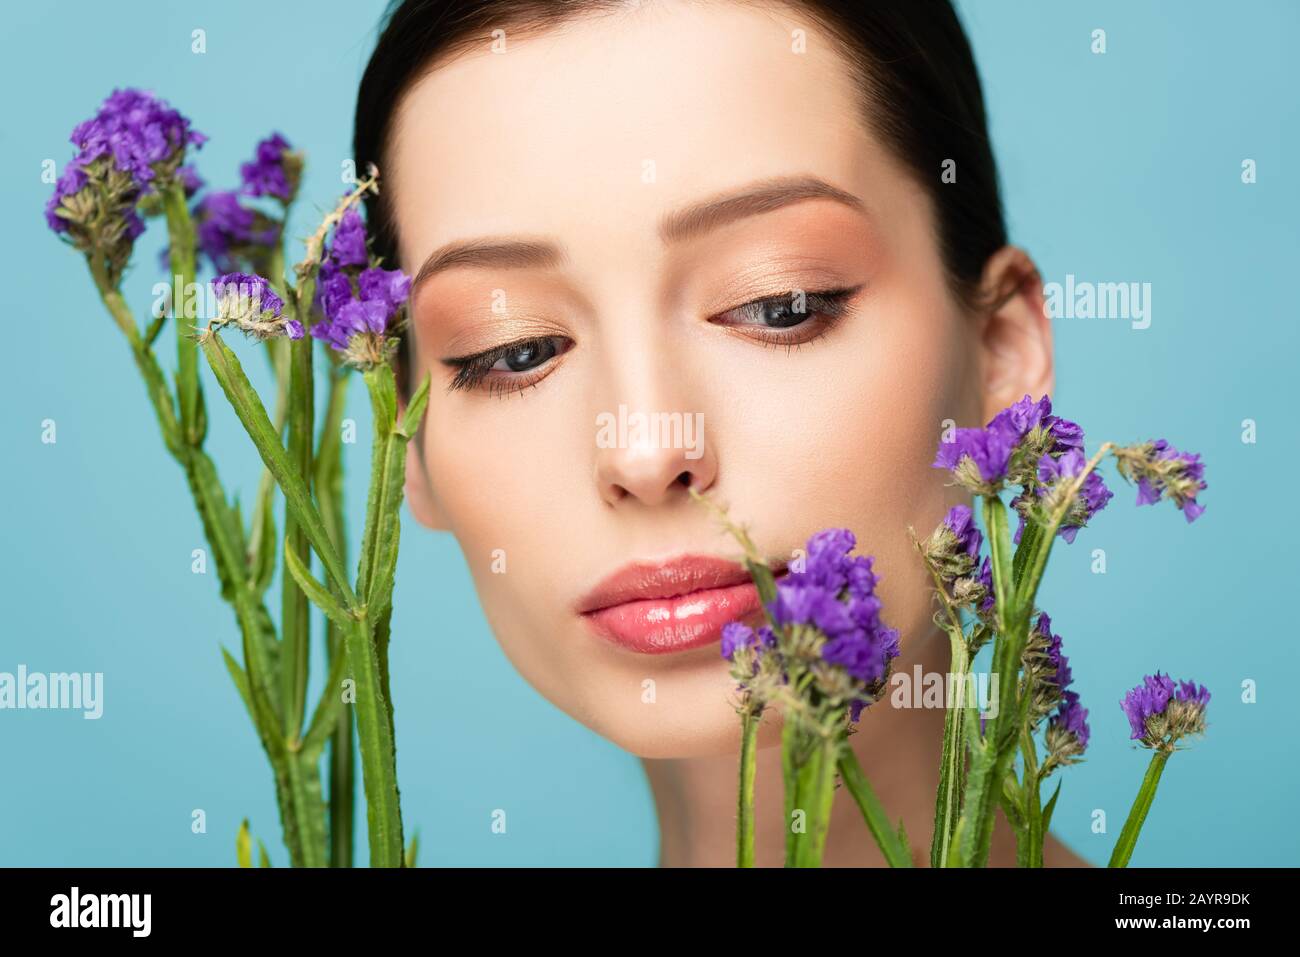 beautiful woman looking at limonium flowers isolated on blue Stock Photo